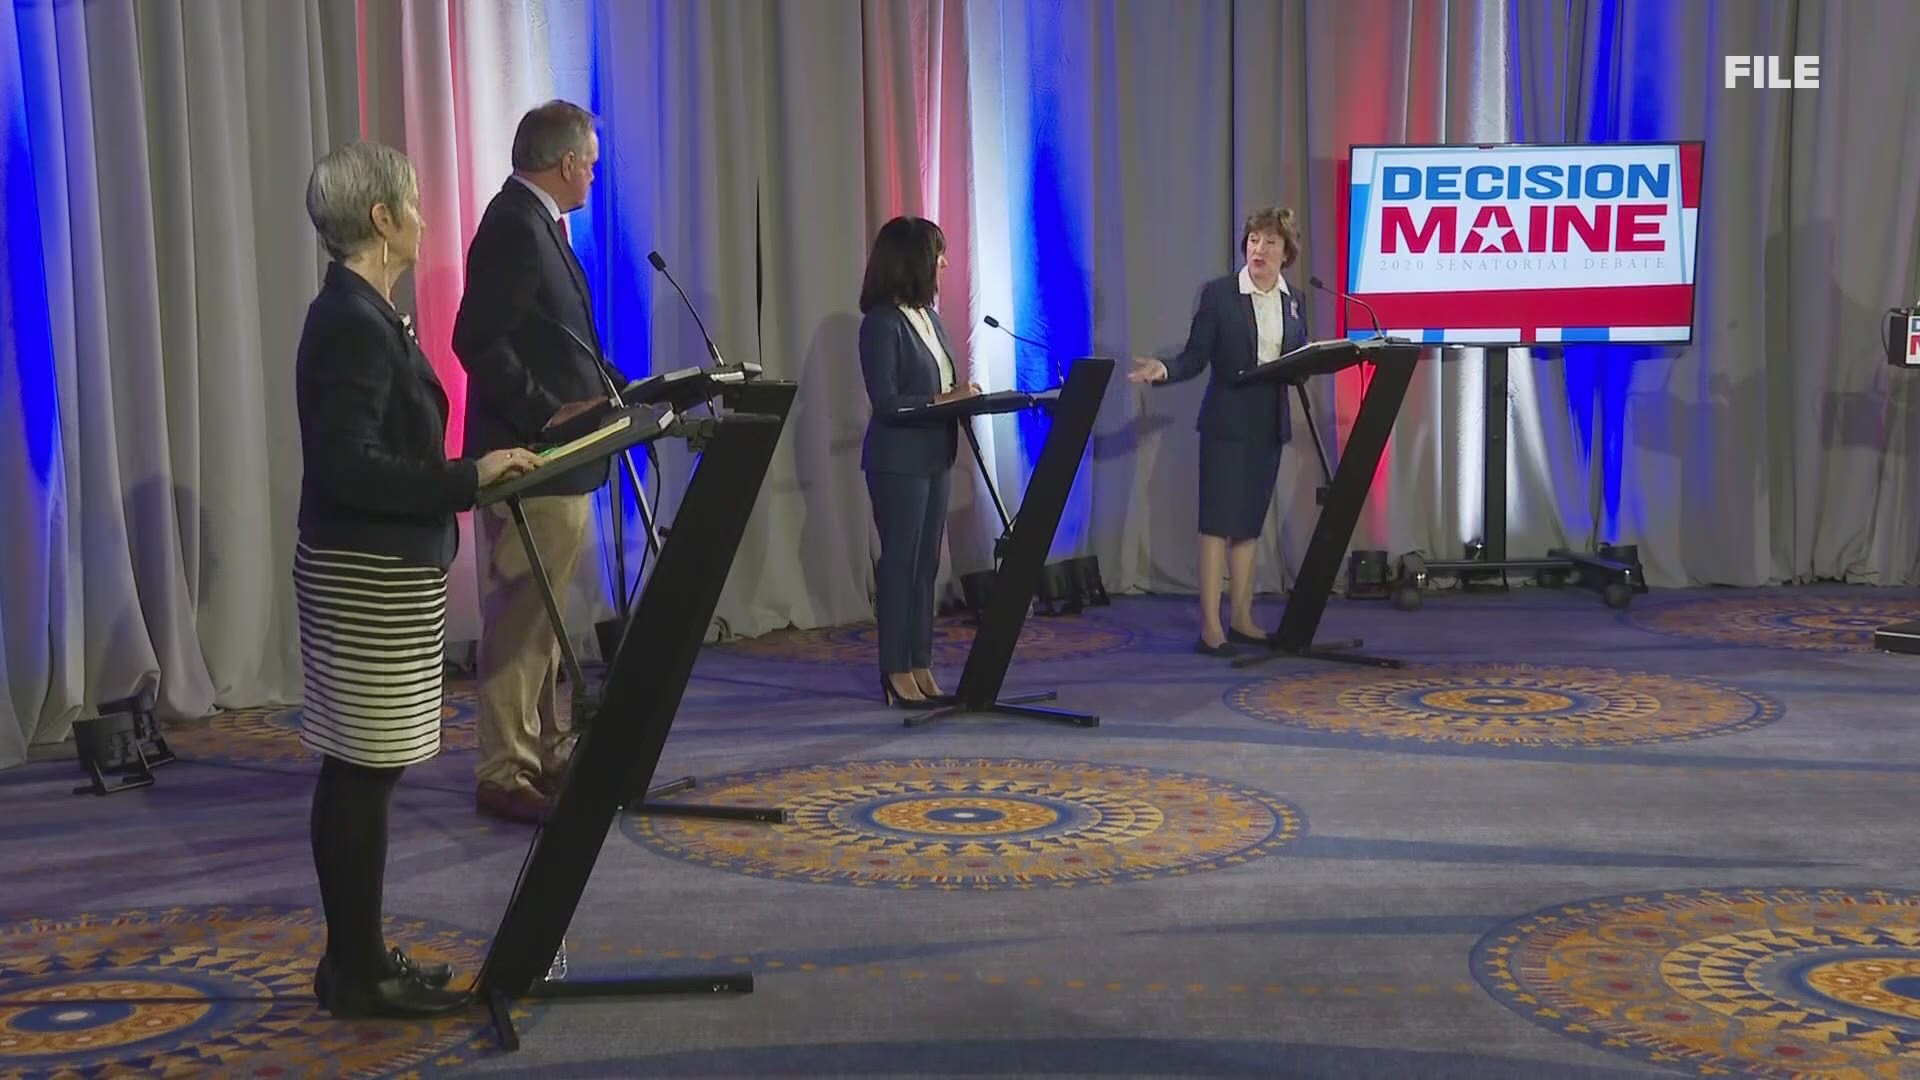 The debate originally set to start here at the Holiday Inn is now virtual.